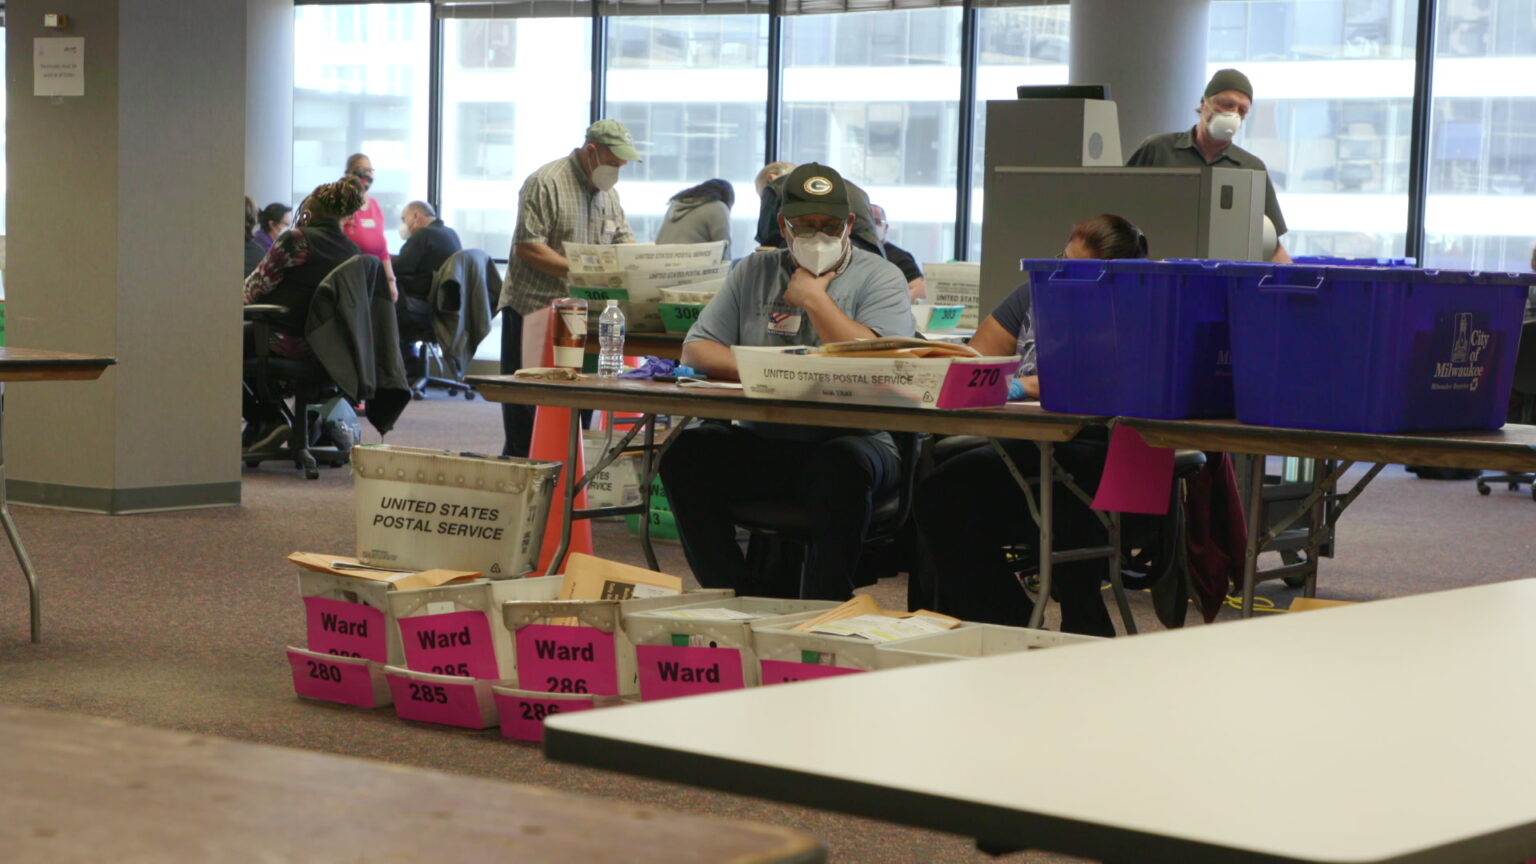 Election workers sit and stand at tables in a room with United States Postal Service boxes filled with absentee ballots sitting on the floor in the foreground.